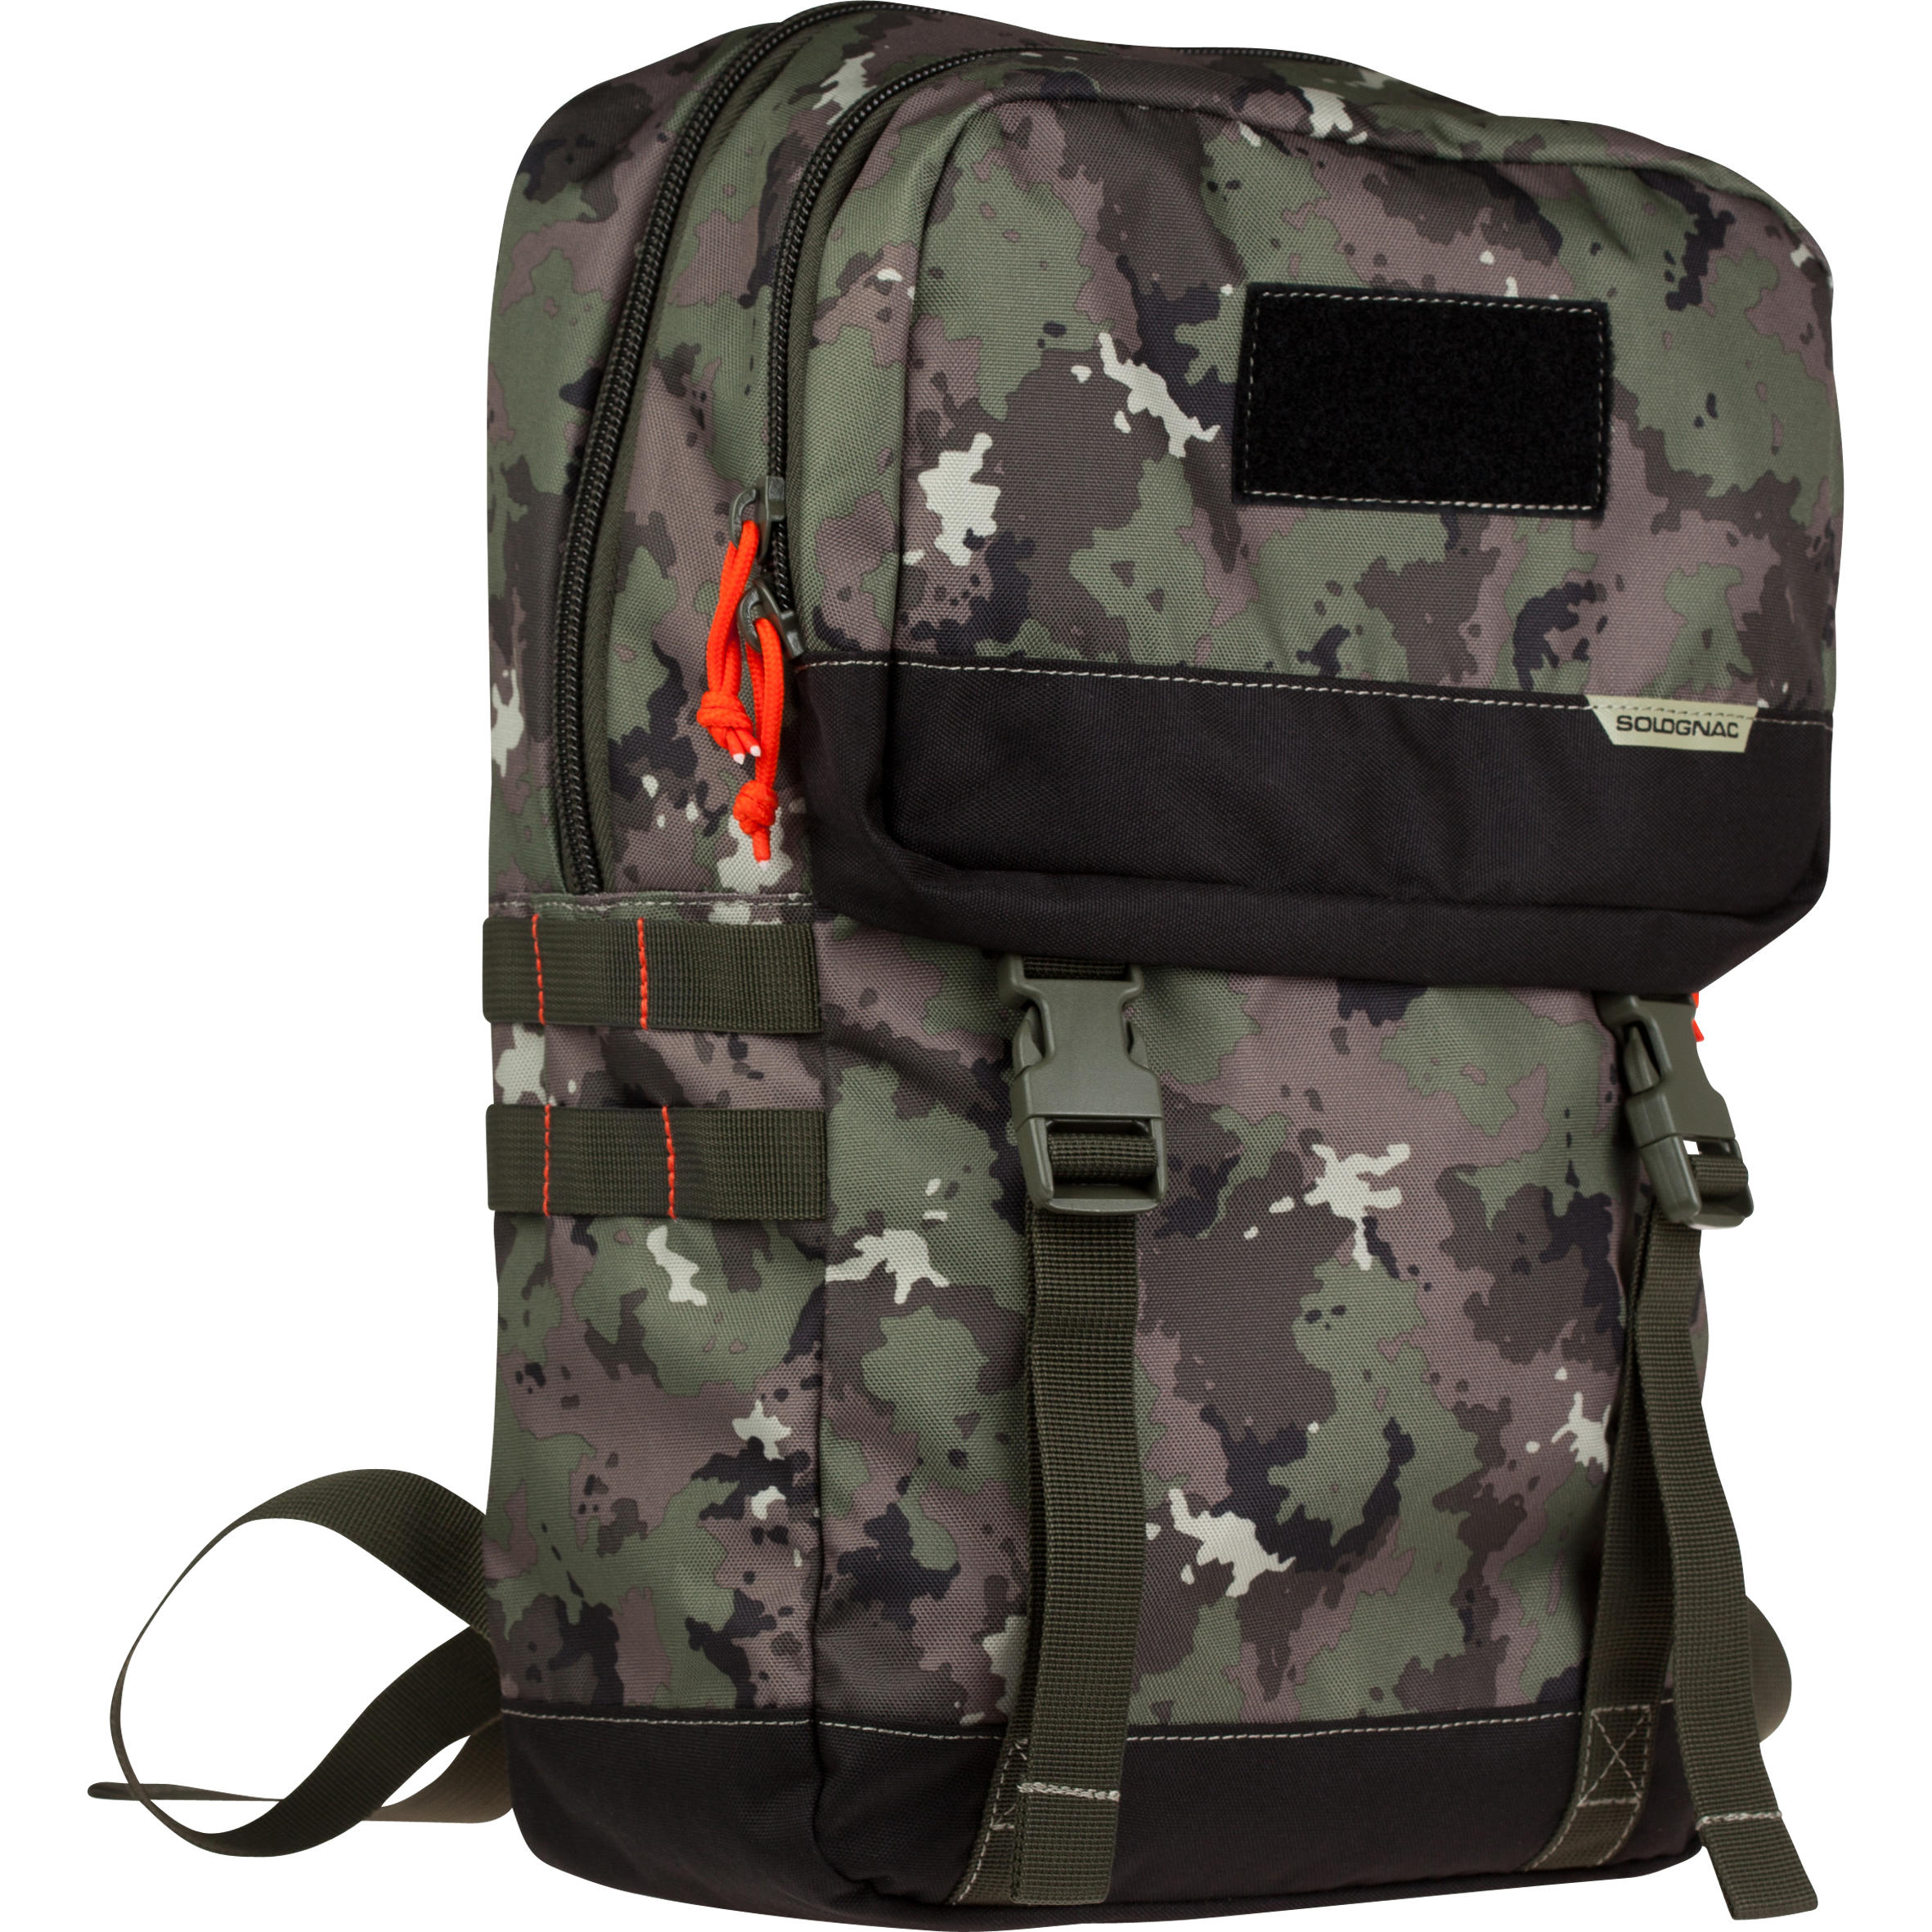 Acc Backpack 20 Litre Camo Green